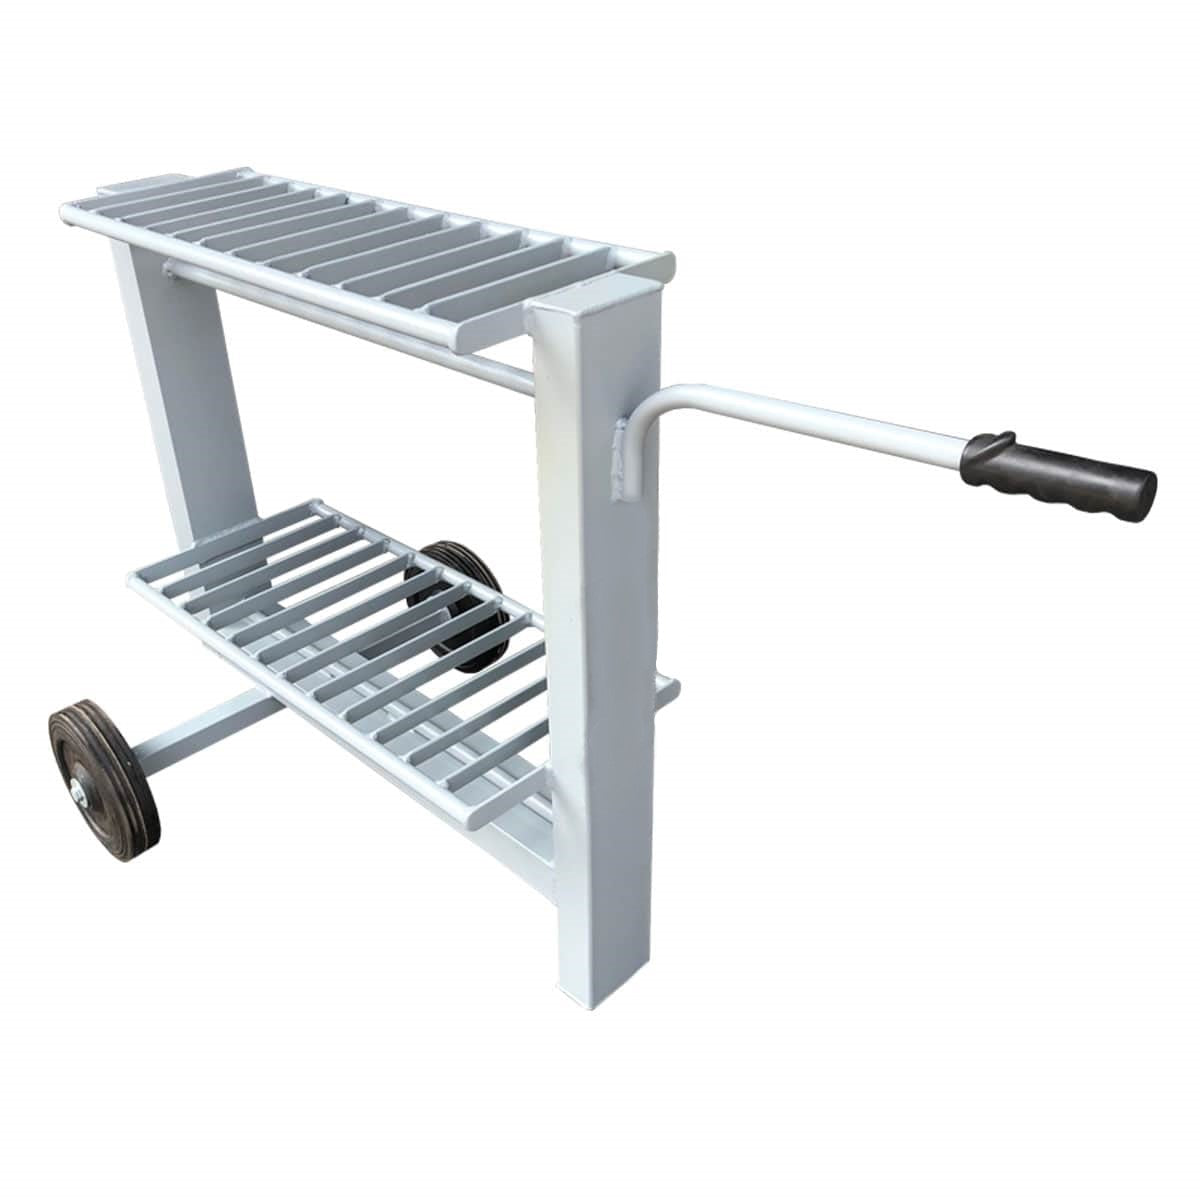 Discus Trolley